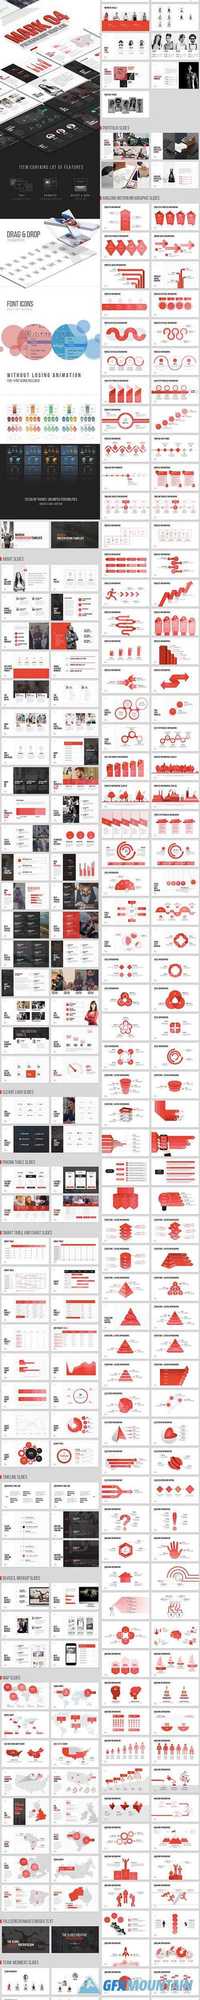 GraphicRiver - MARK04-Powerpoint Template - 15578706